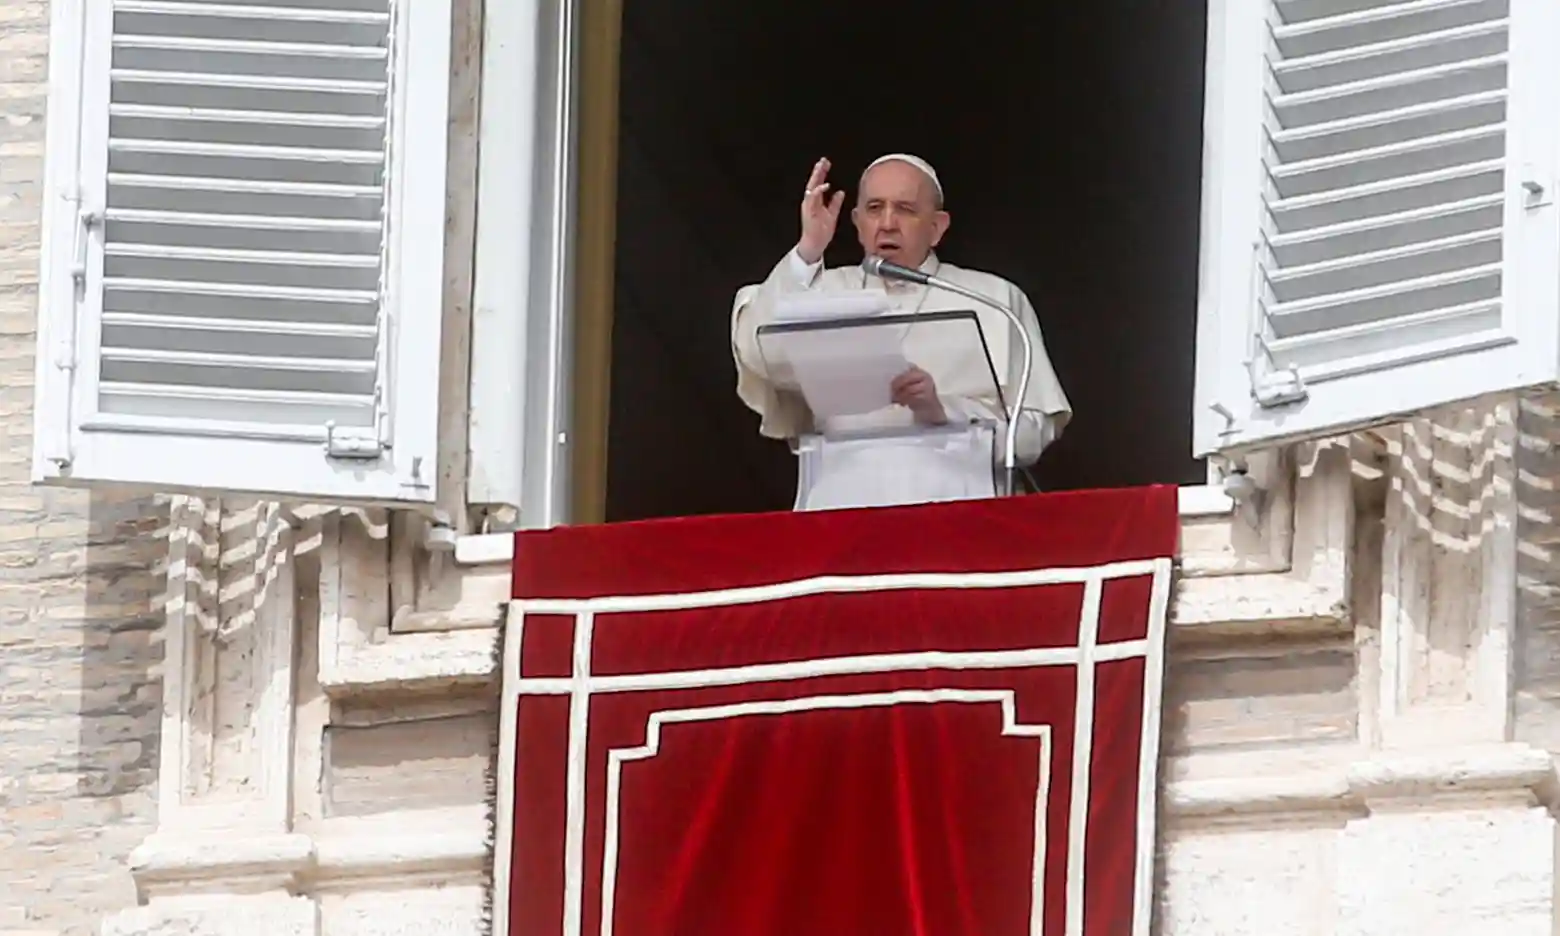 Pope Francis celebrates Sunday Angelus Prayer from the window of his office overlooking Saint Peter’s Square at the Vatican, 27 March 2022, Defense Express